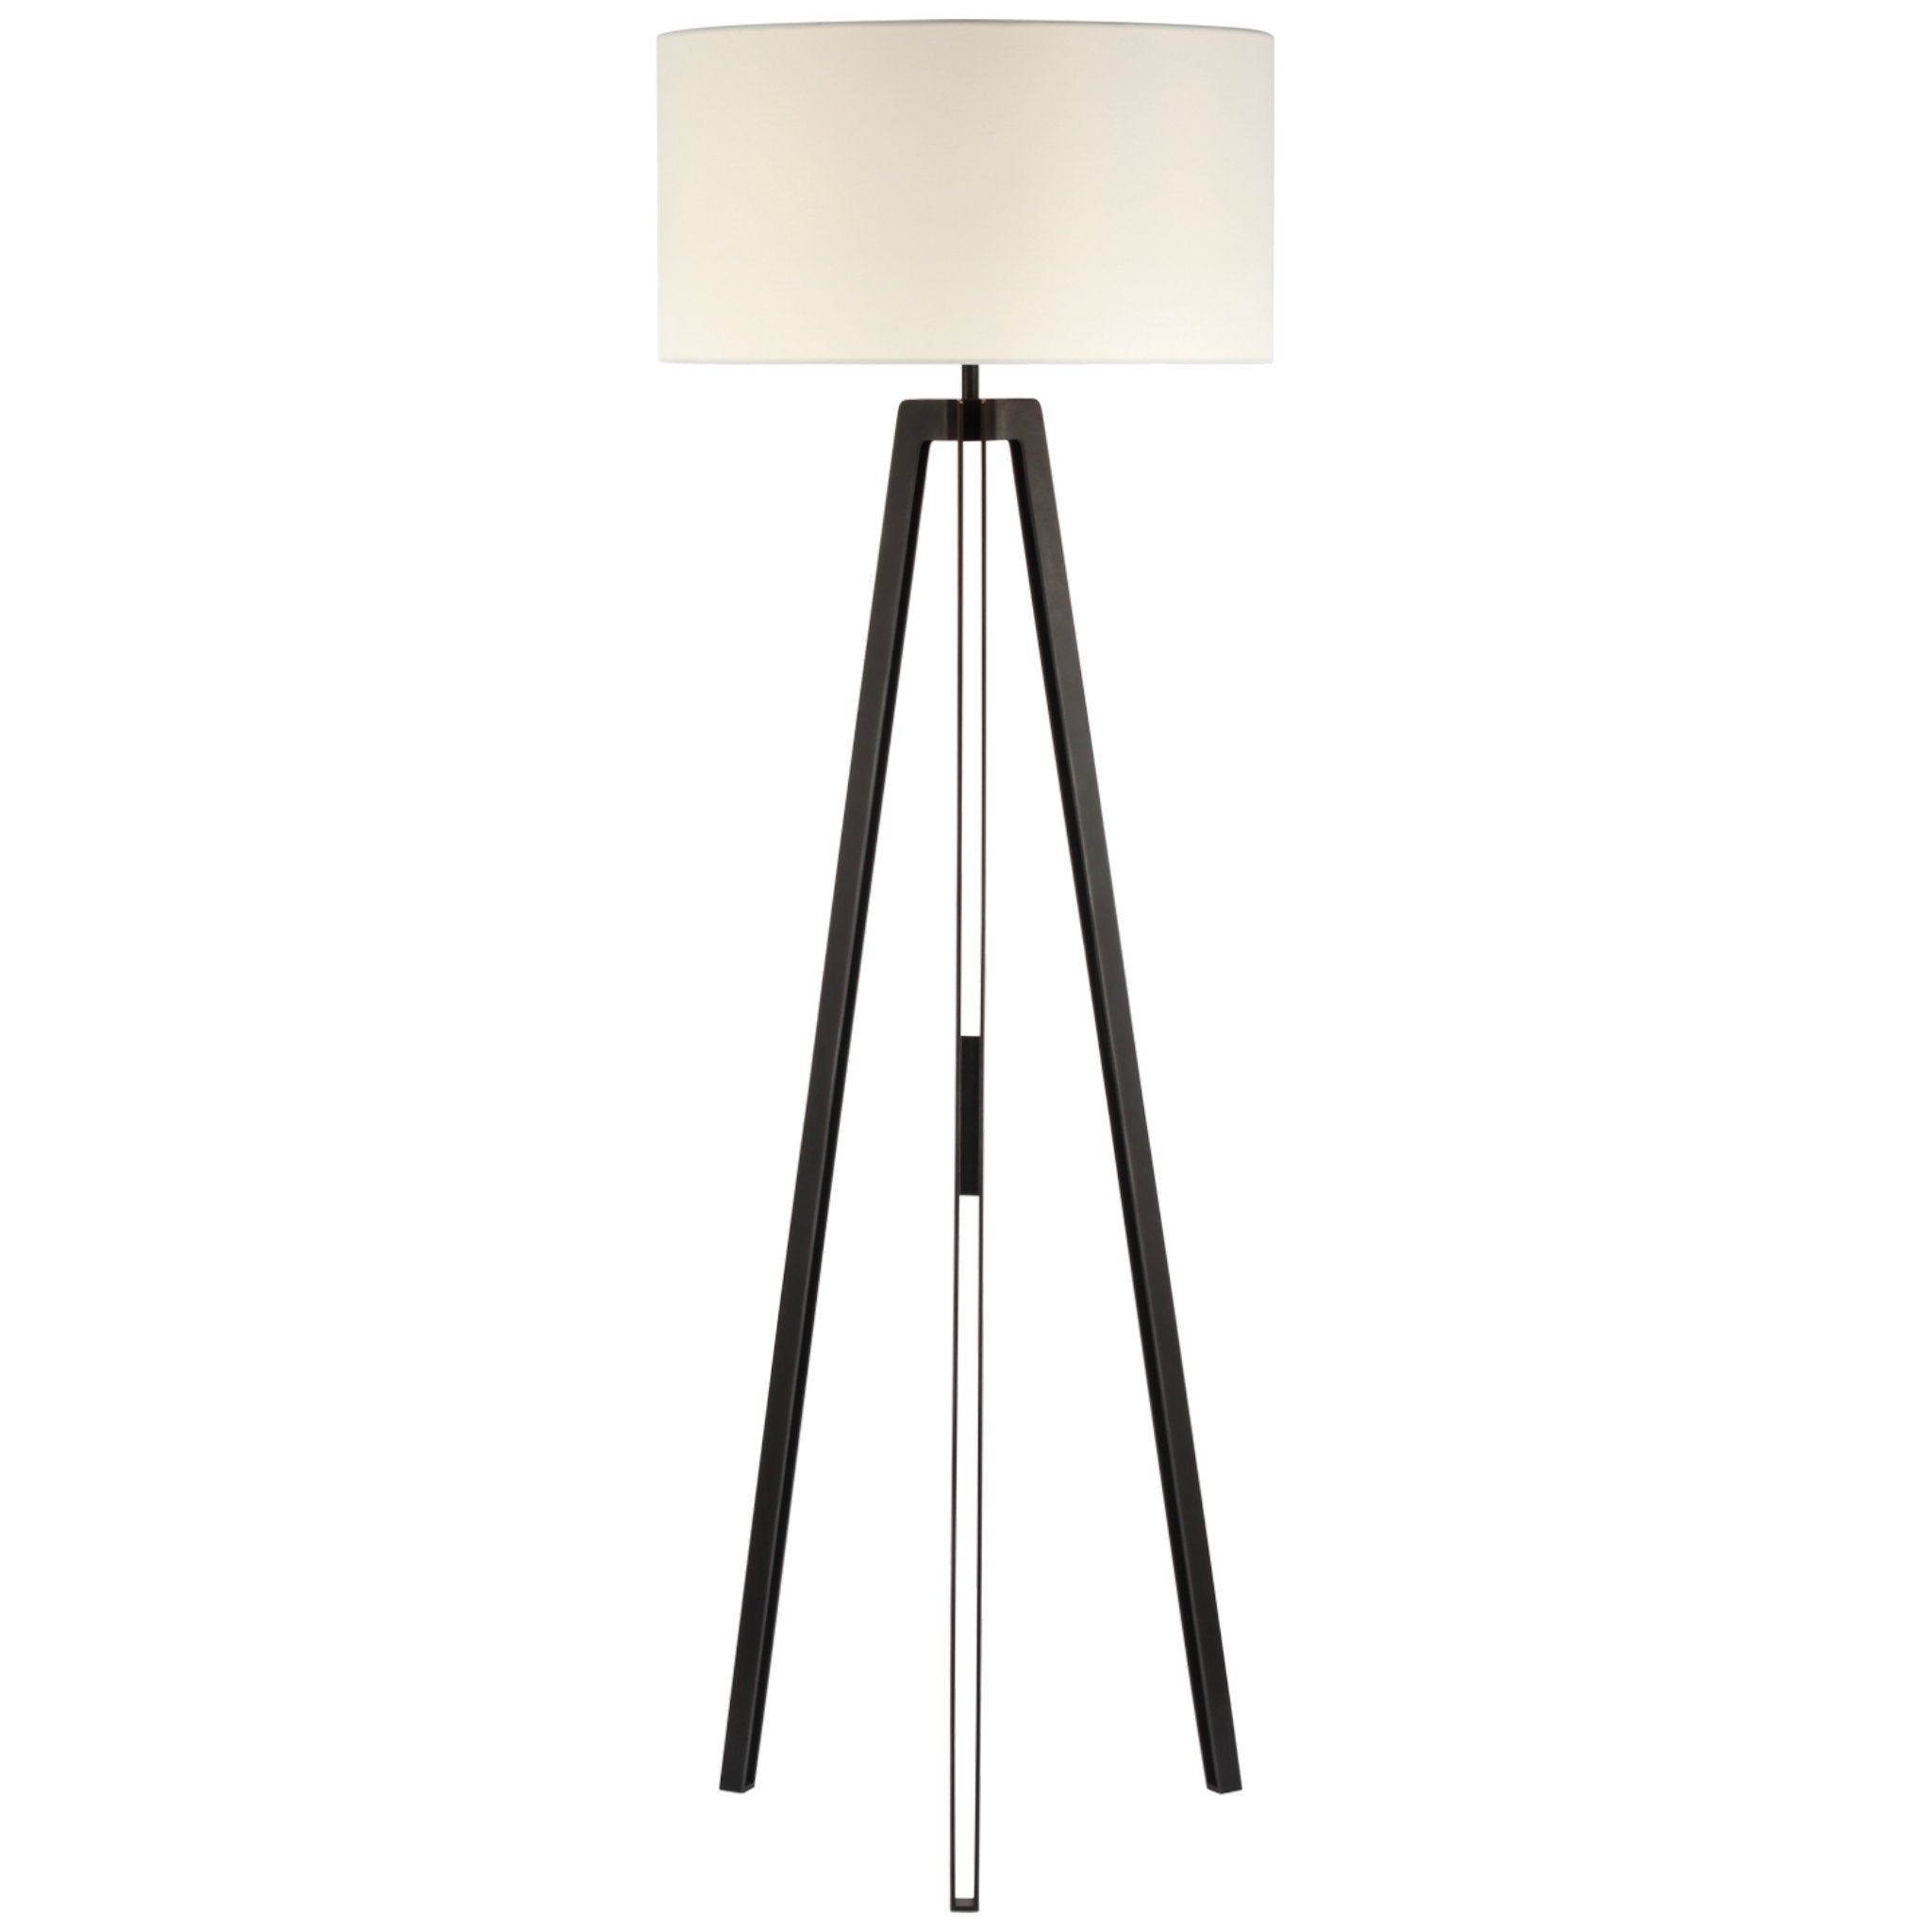 Ian K. Fowler Longhill Large Tripod Floor Lamp in Aged Iron with Linen Shade